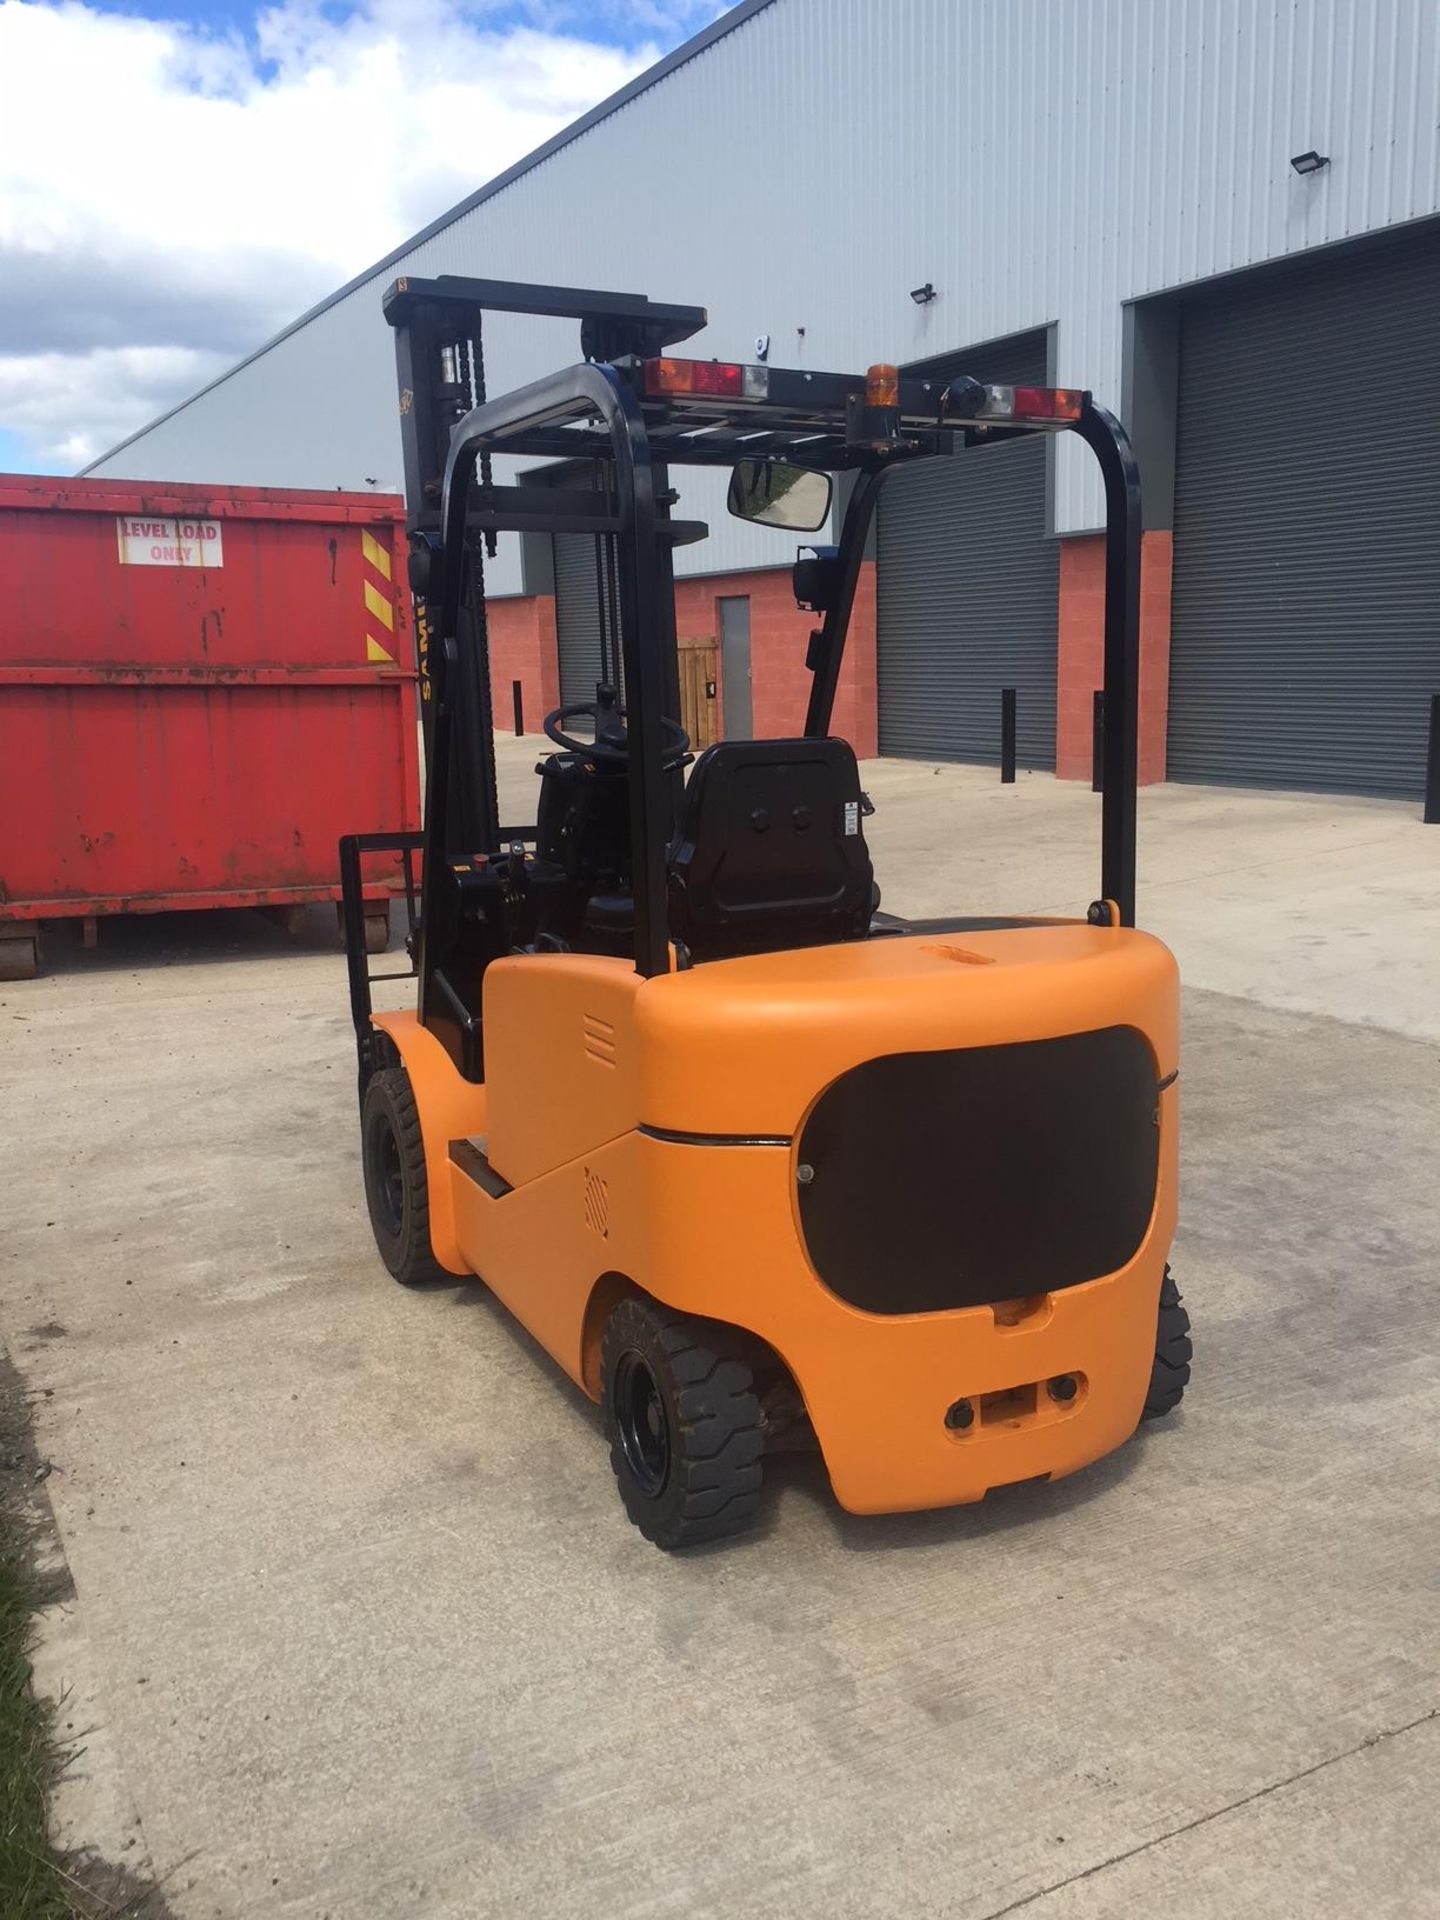 Sam-uk electric counterbalance fork lift truck - Fully refurbished and painted. - Image 6 of 9